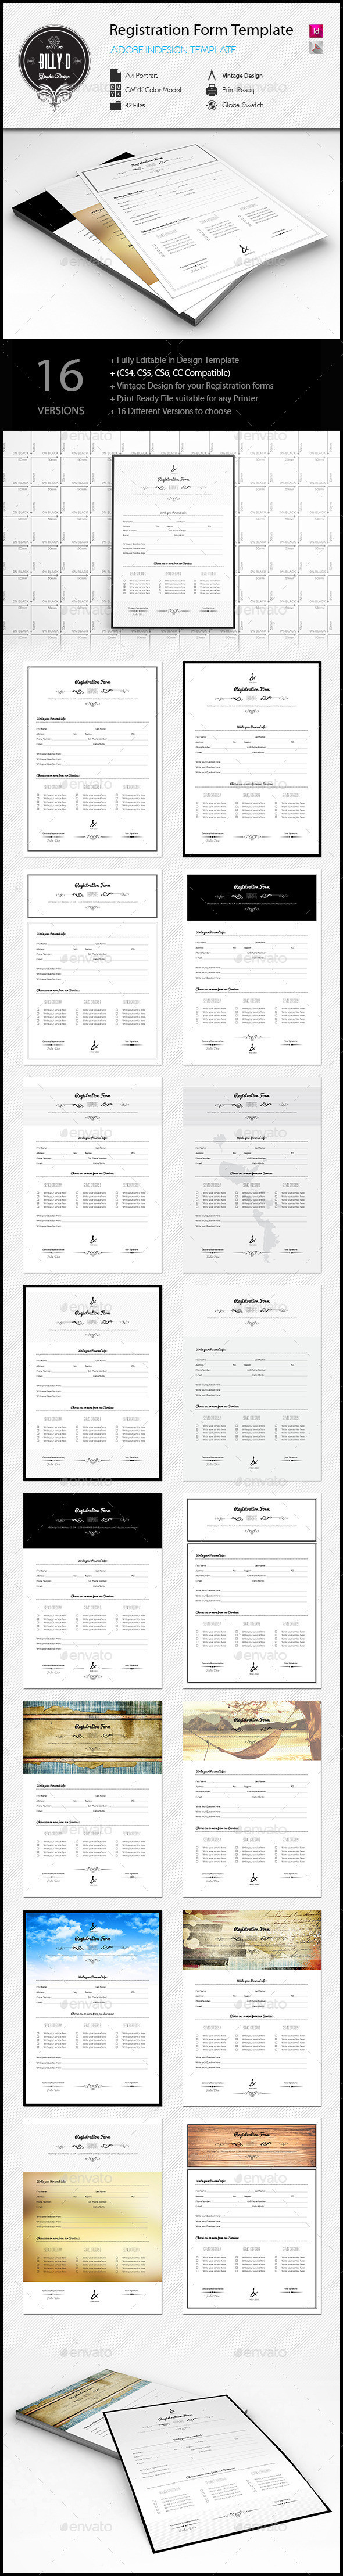 Registration 20form 20a4 20template 20preview 20image 20590x